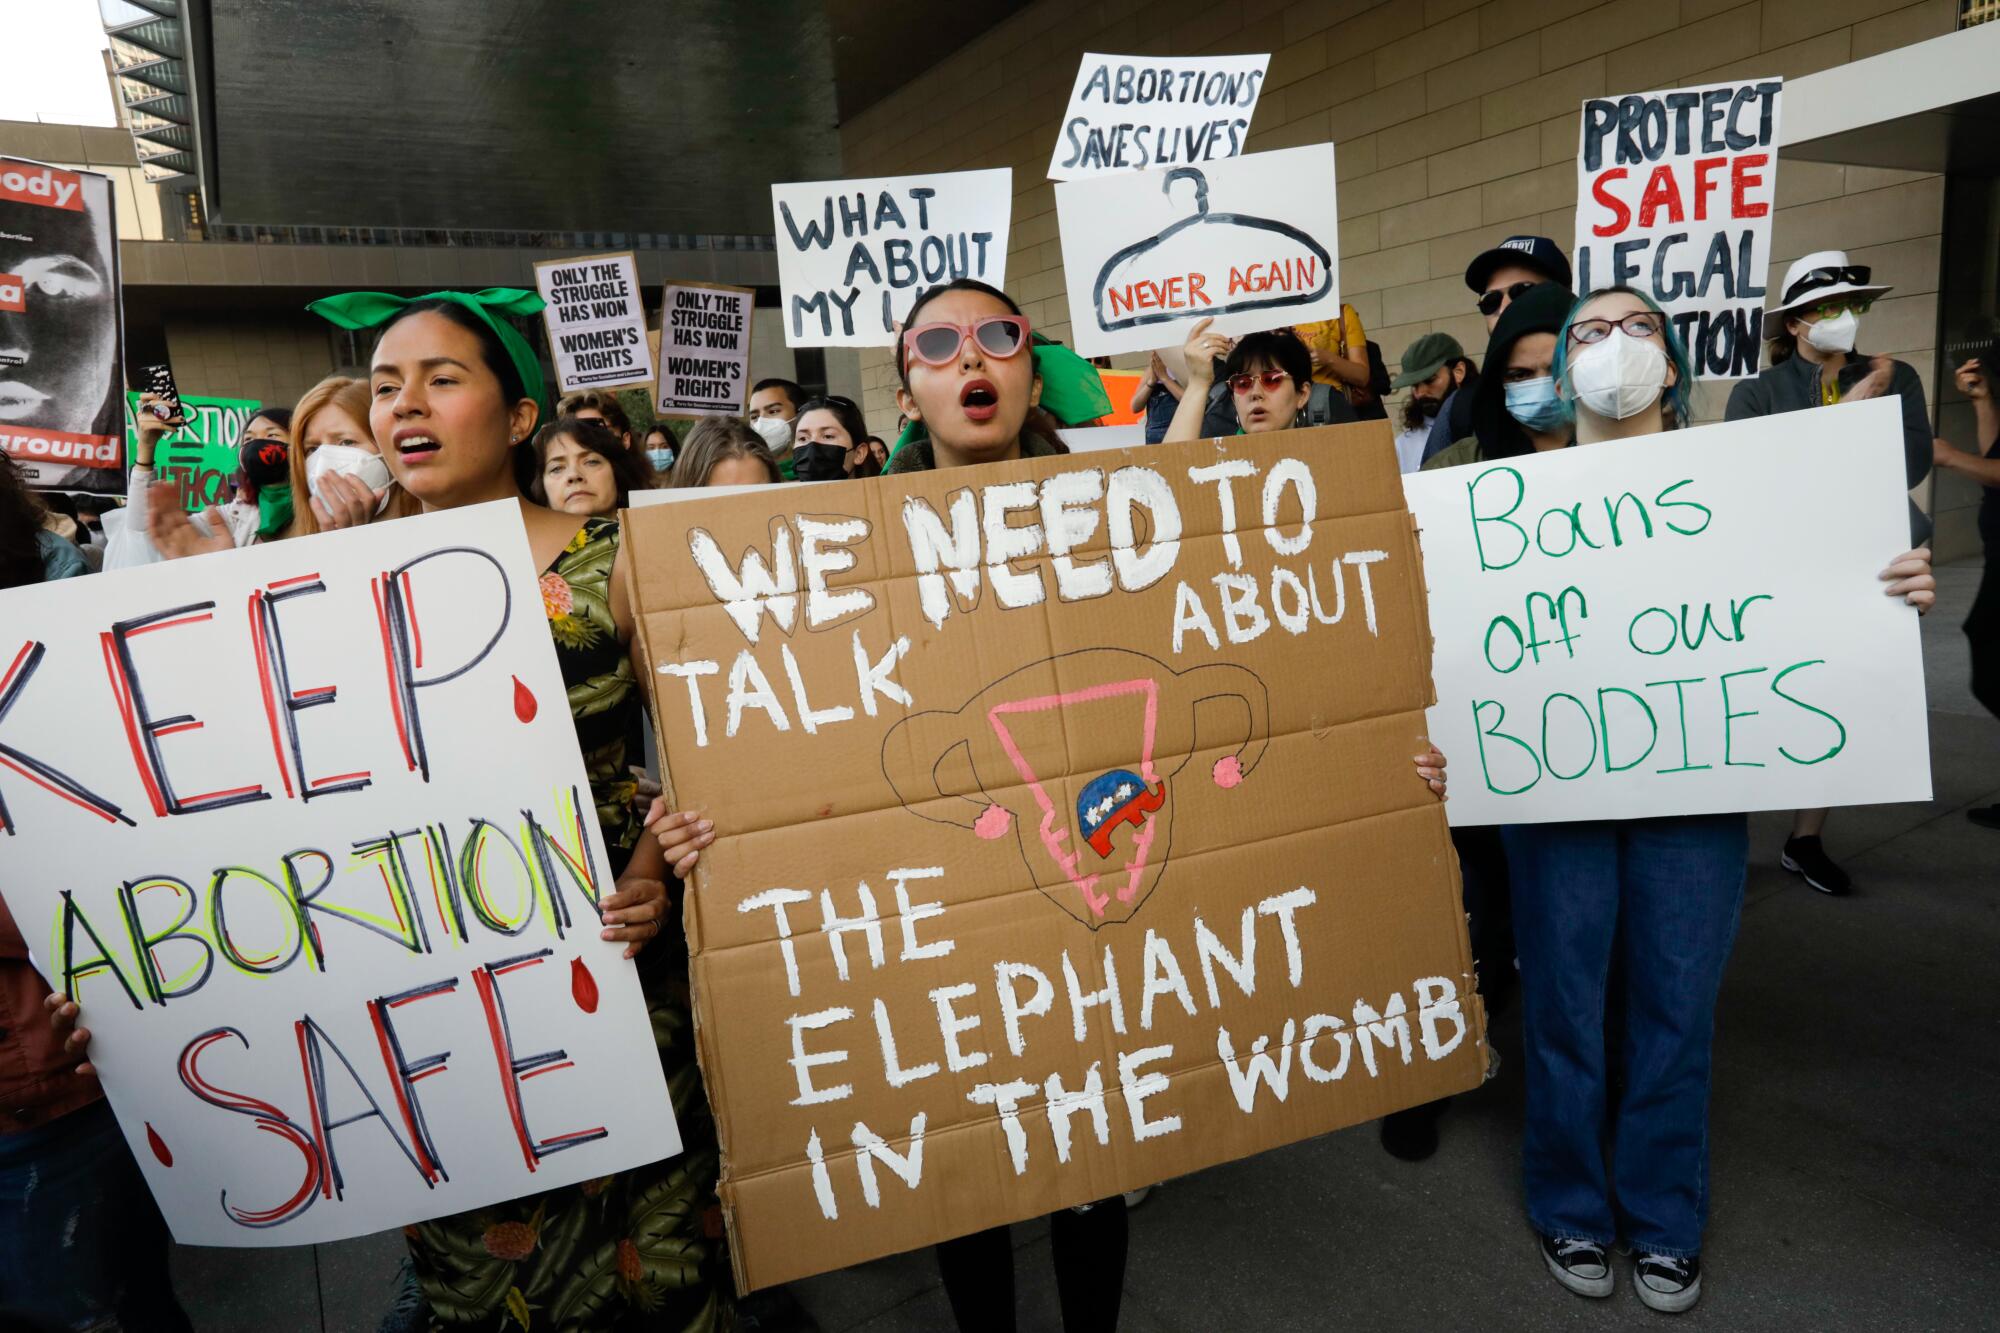 People hold signs in support of abortion rights